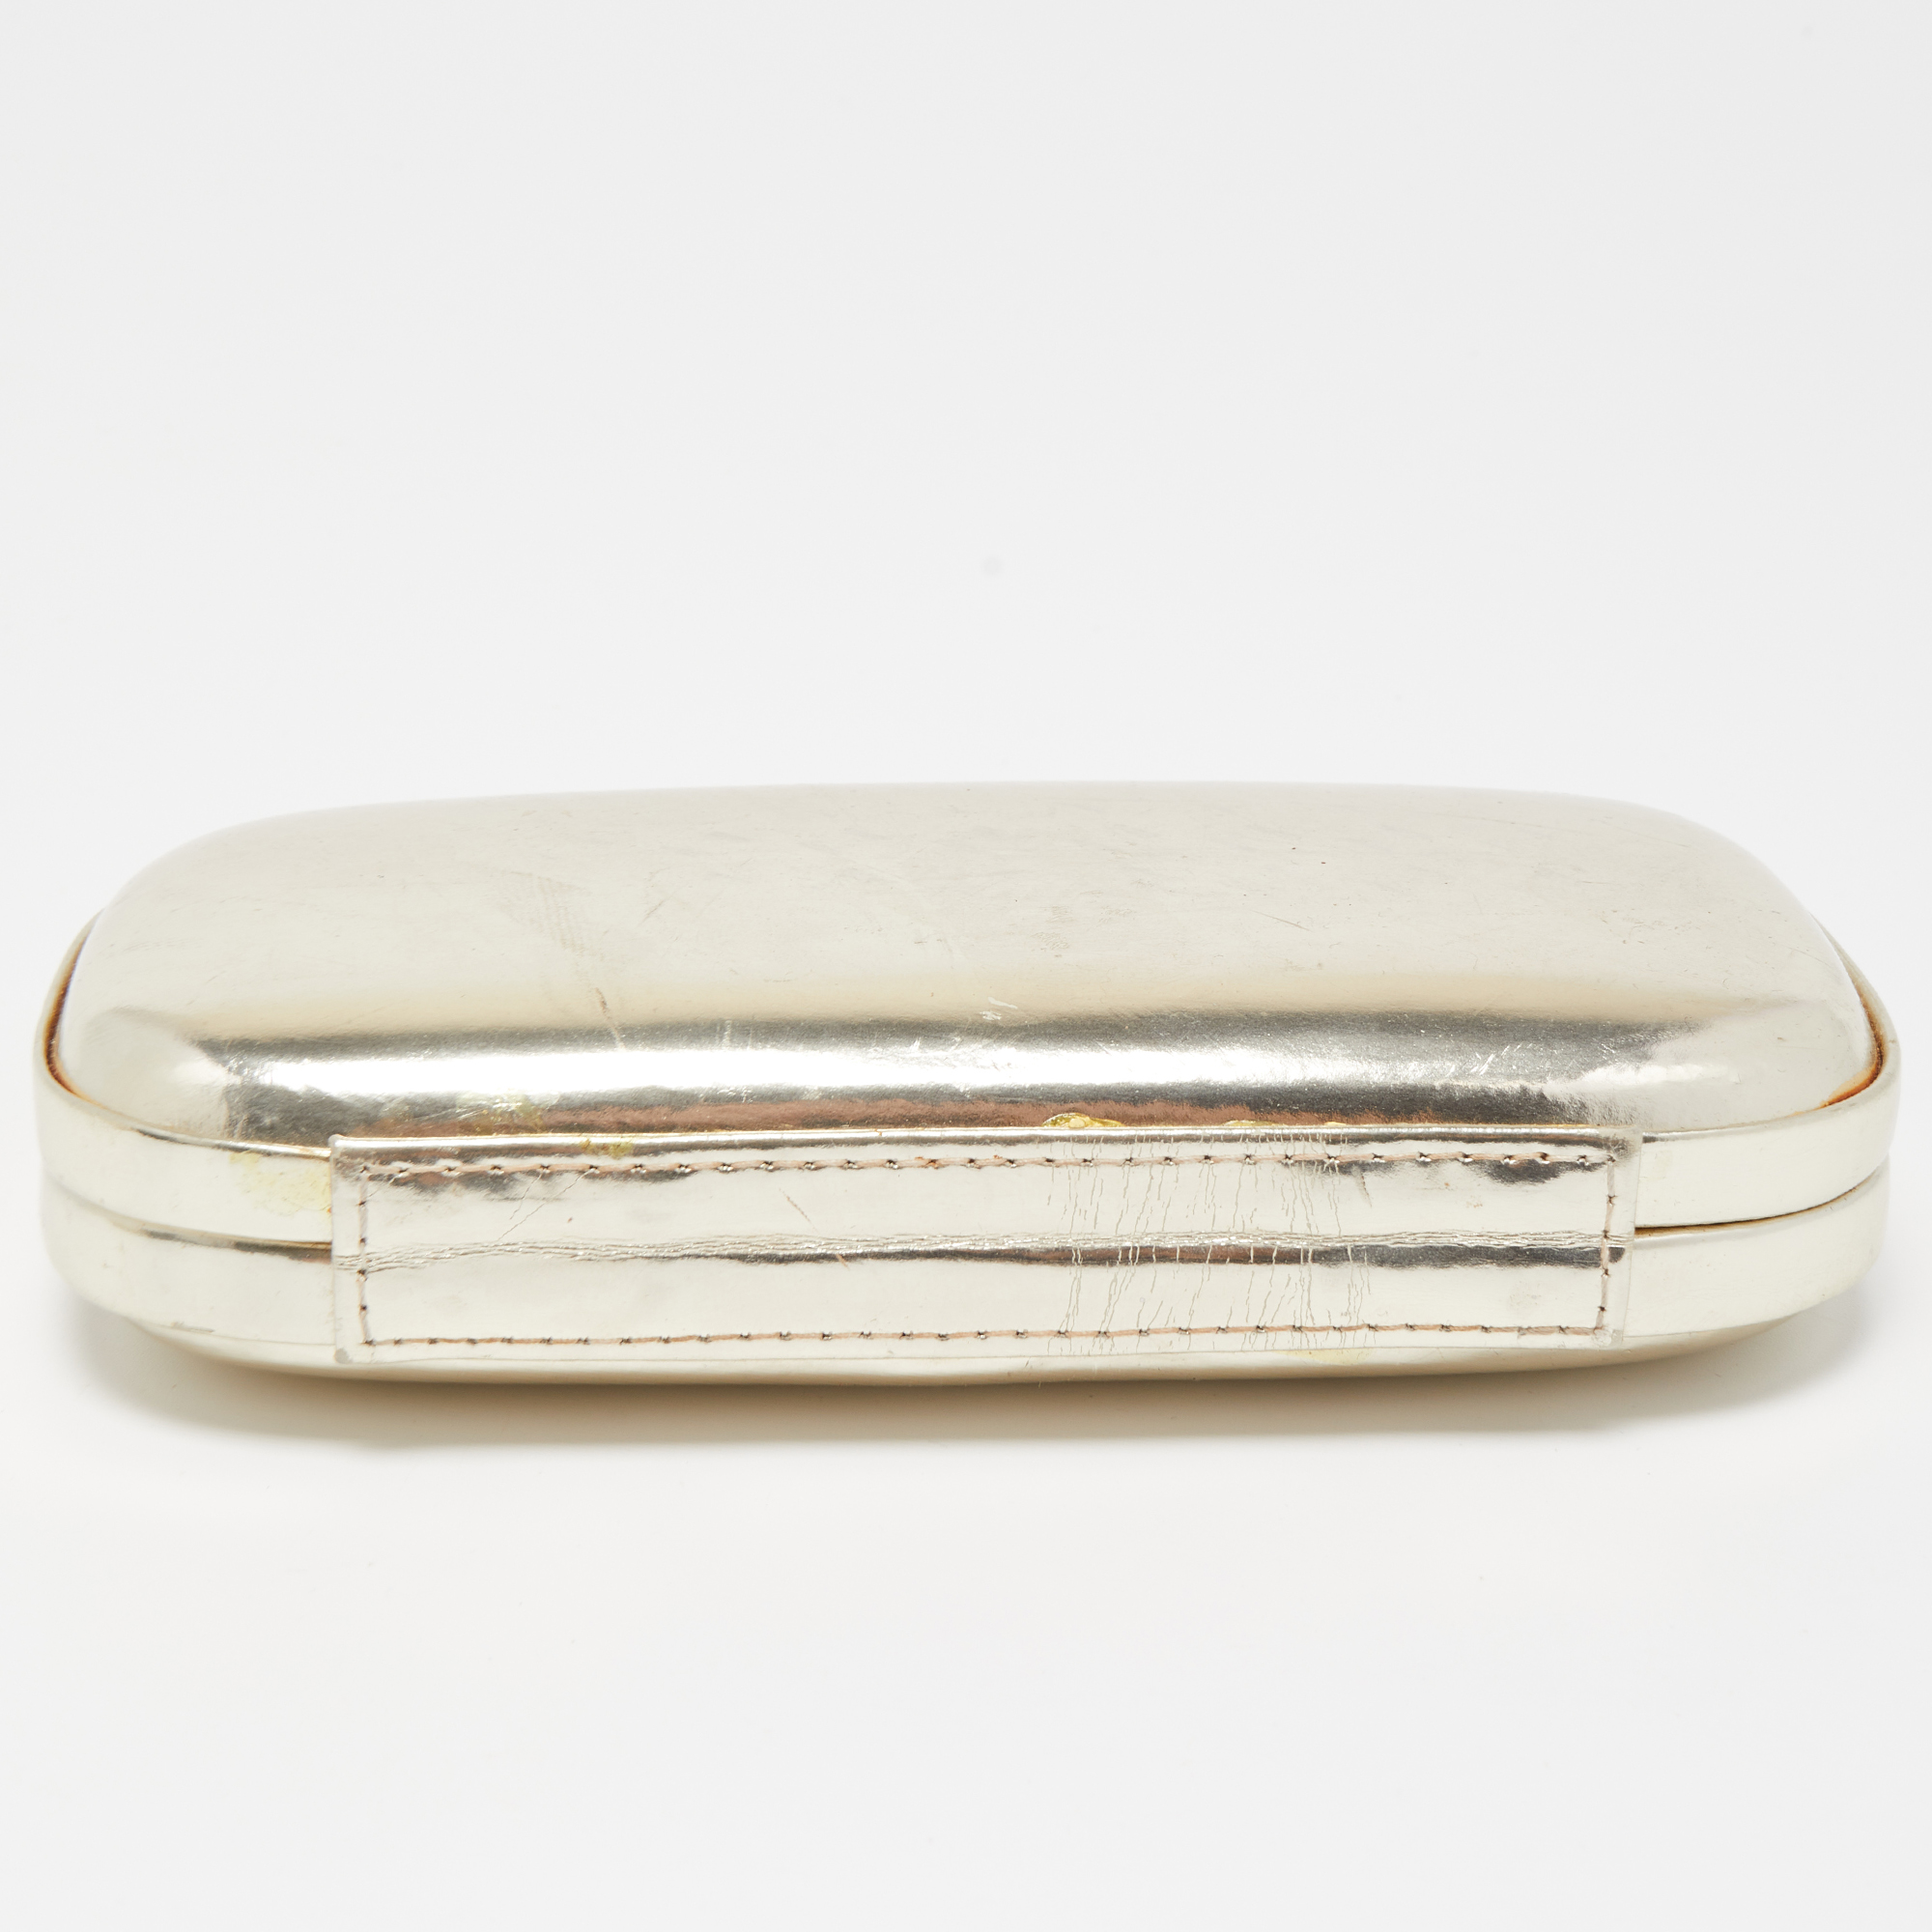 Anya Hindmarch Pale Gold Leather Marano Clutch